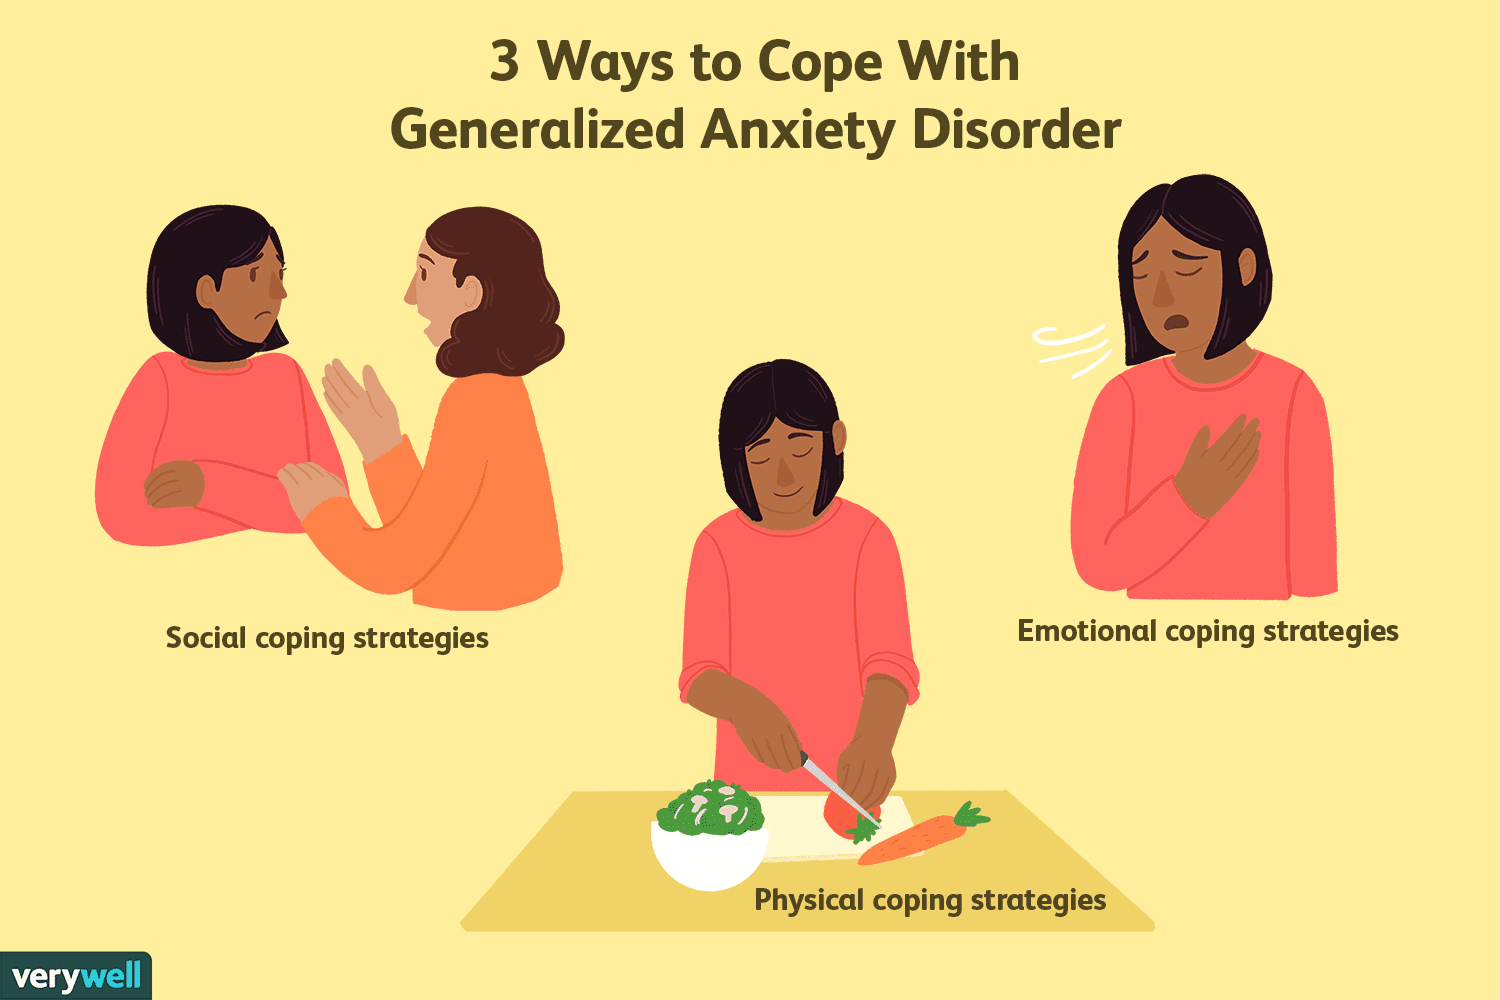 Coping With Generalized Anxiety Disorder: Tips for Living Well